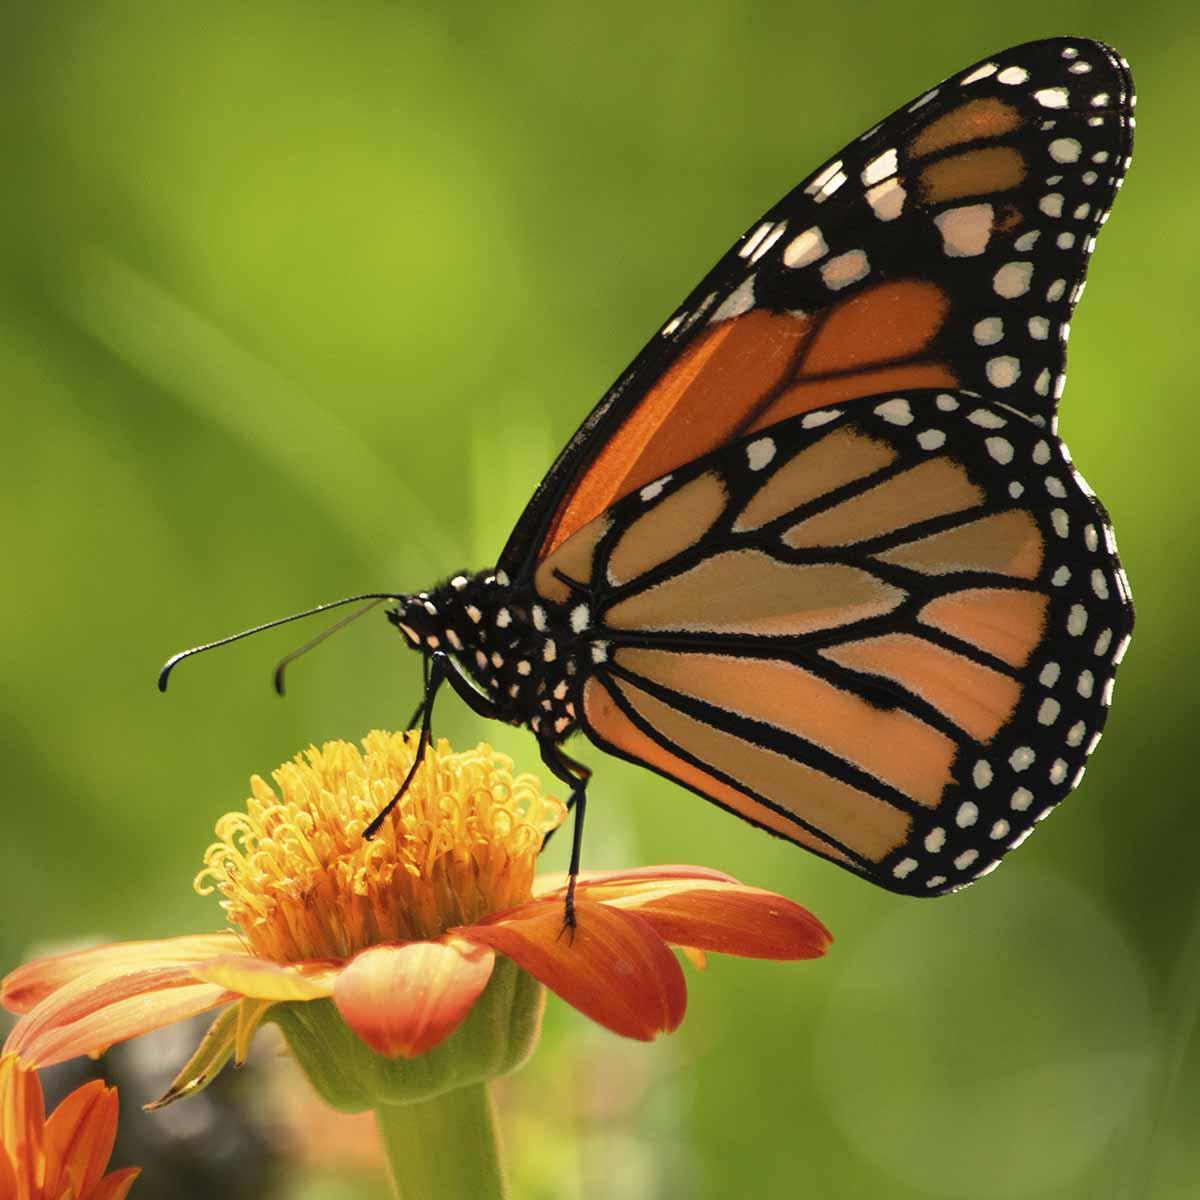 A orange, black, with white spots butterfly on flower